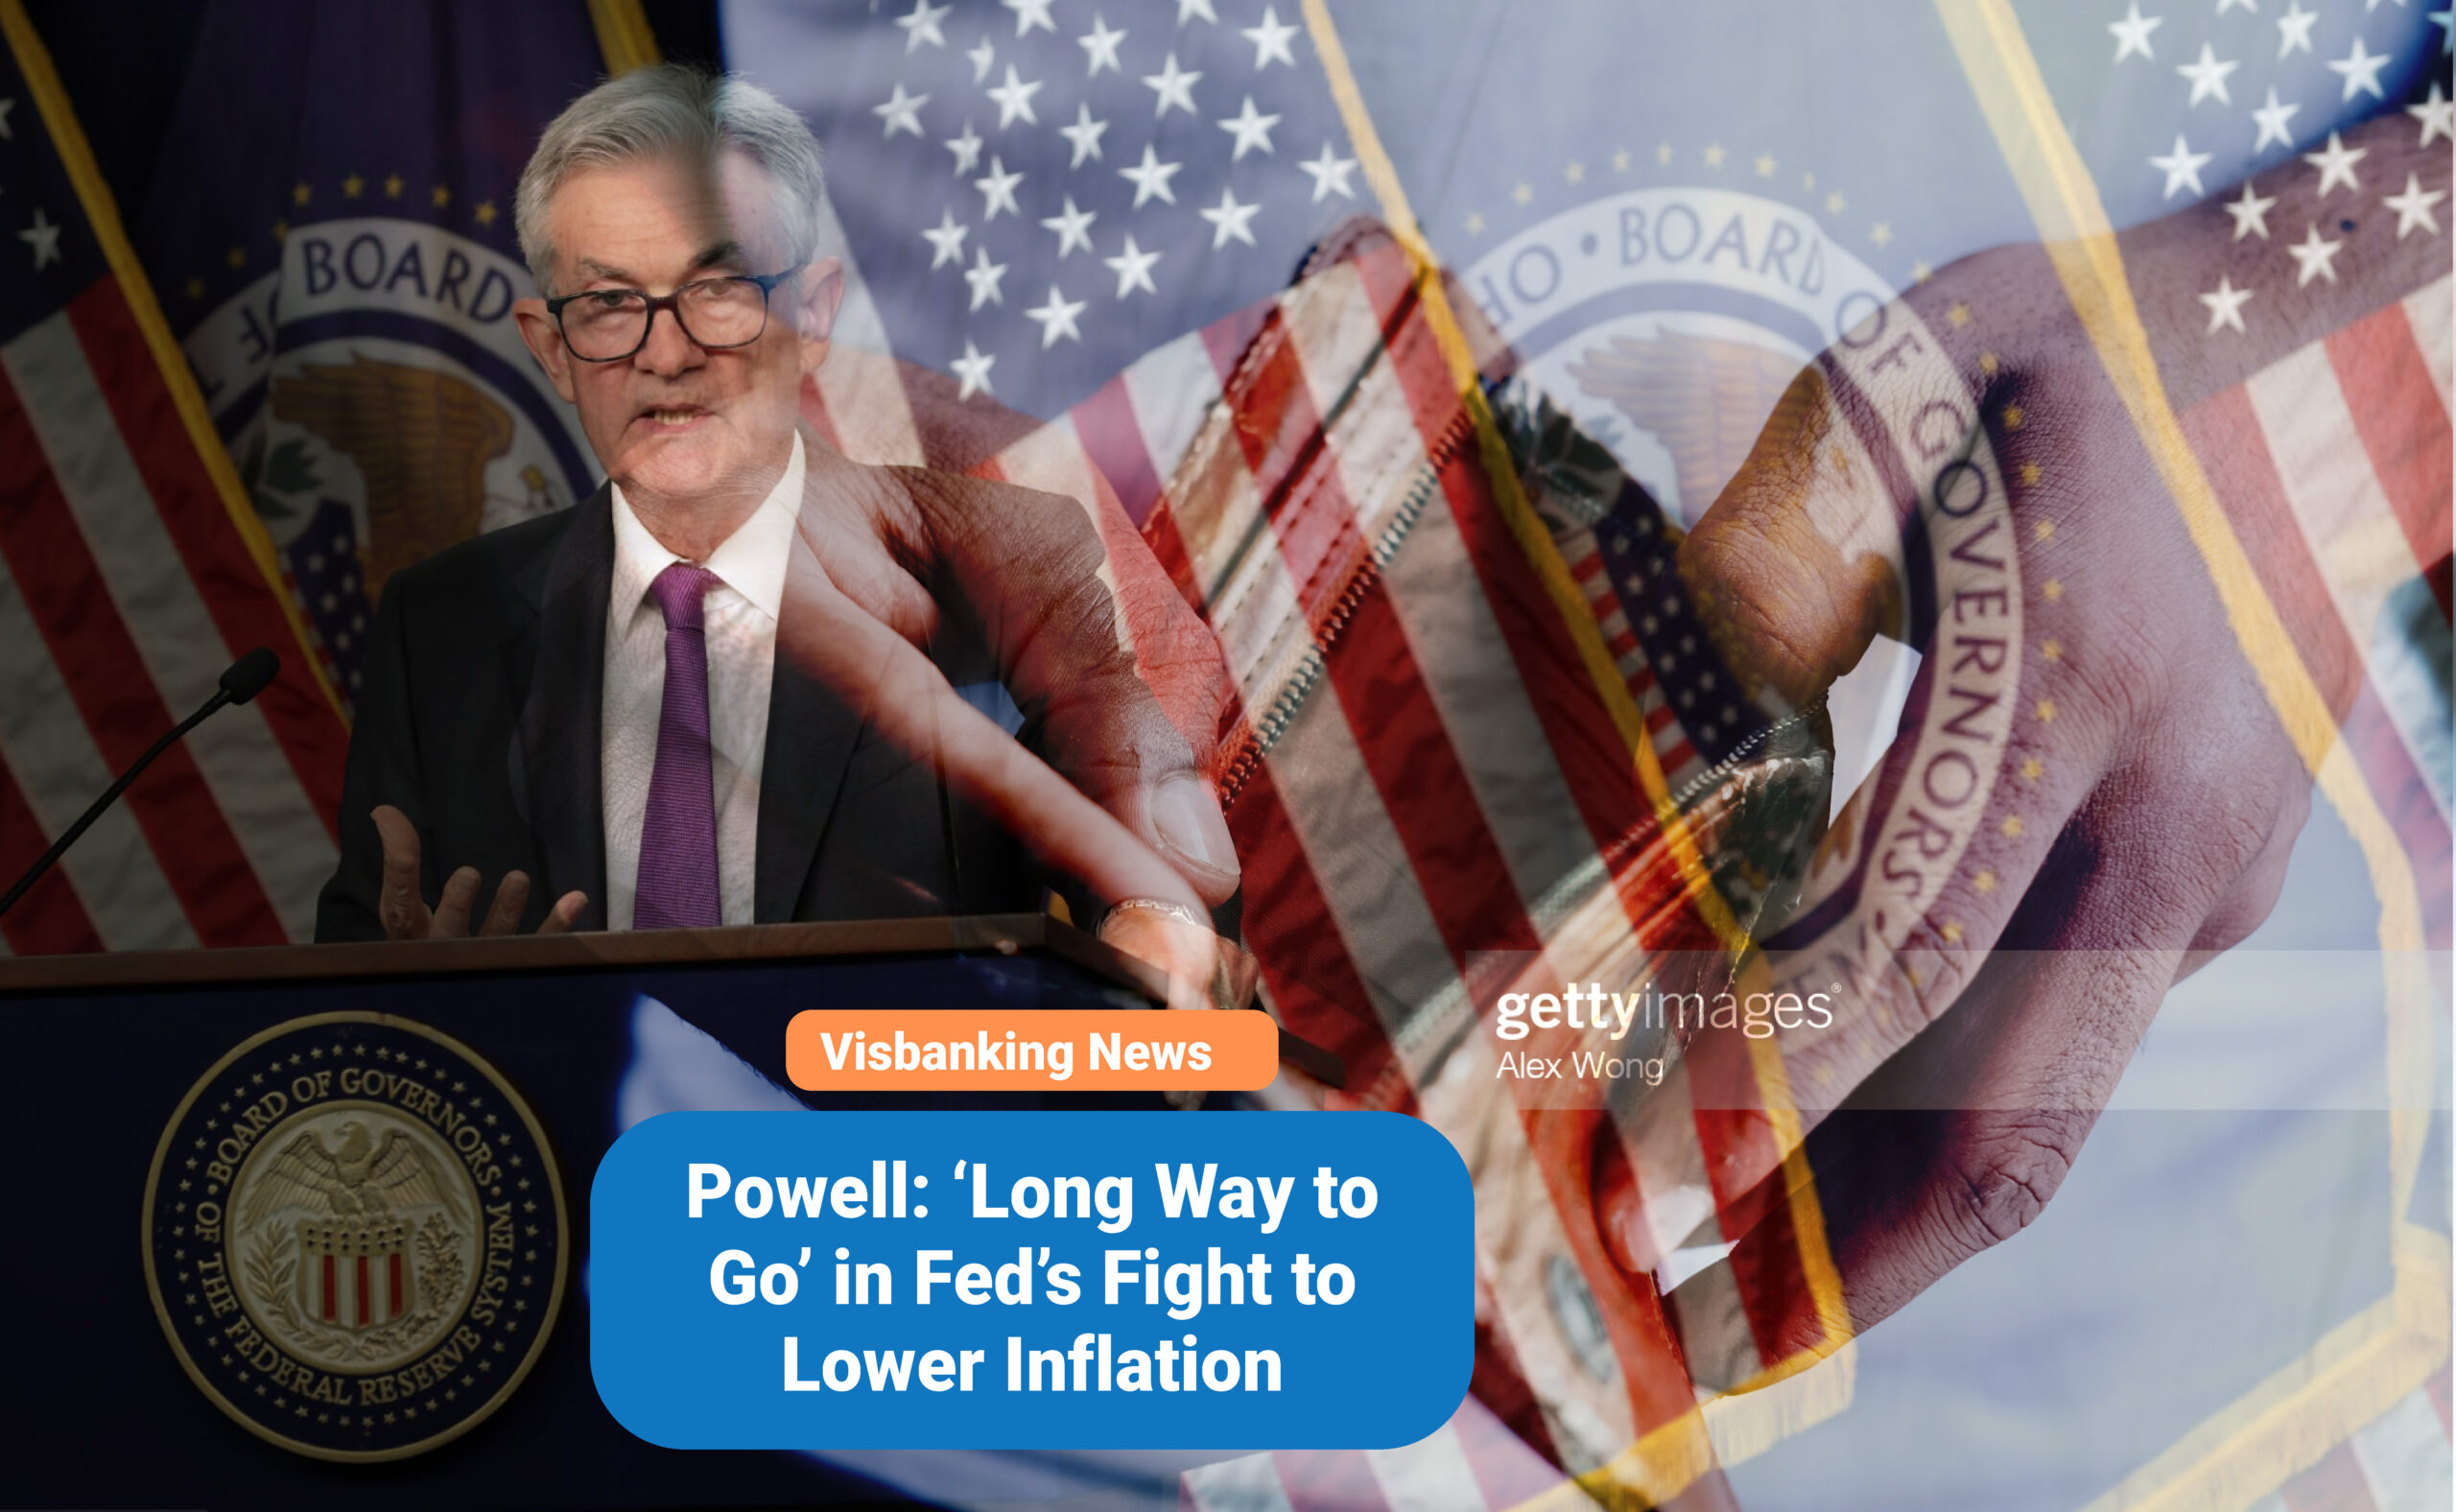 Powell: ‘Long Way to Go’ in Fed’s Fight to Lower Inflation